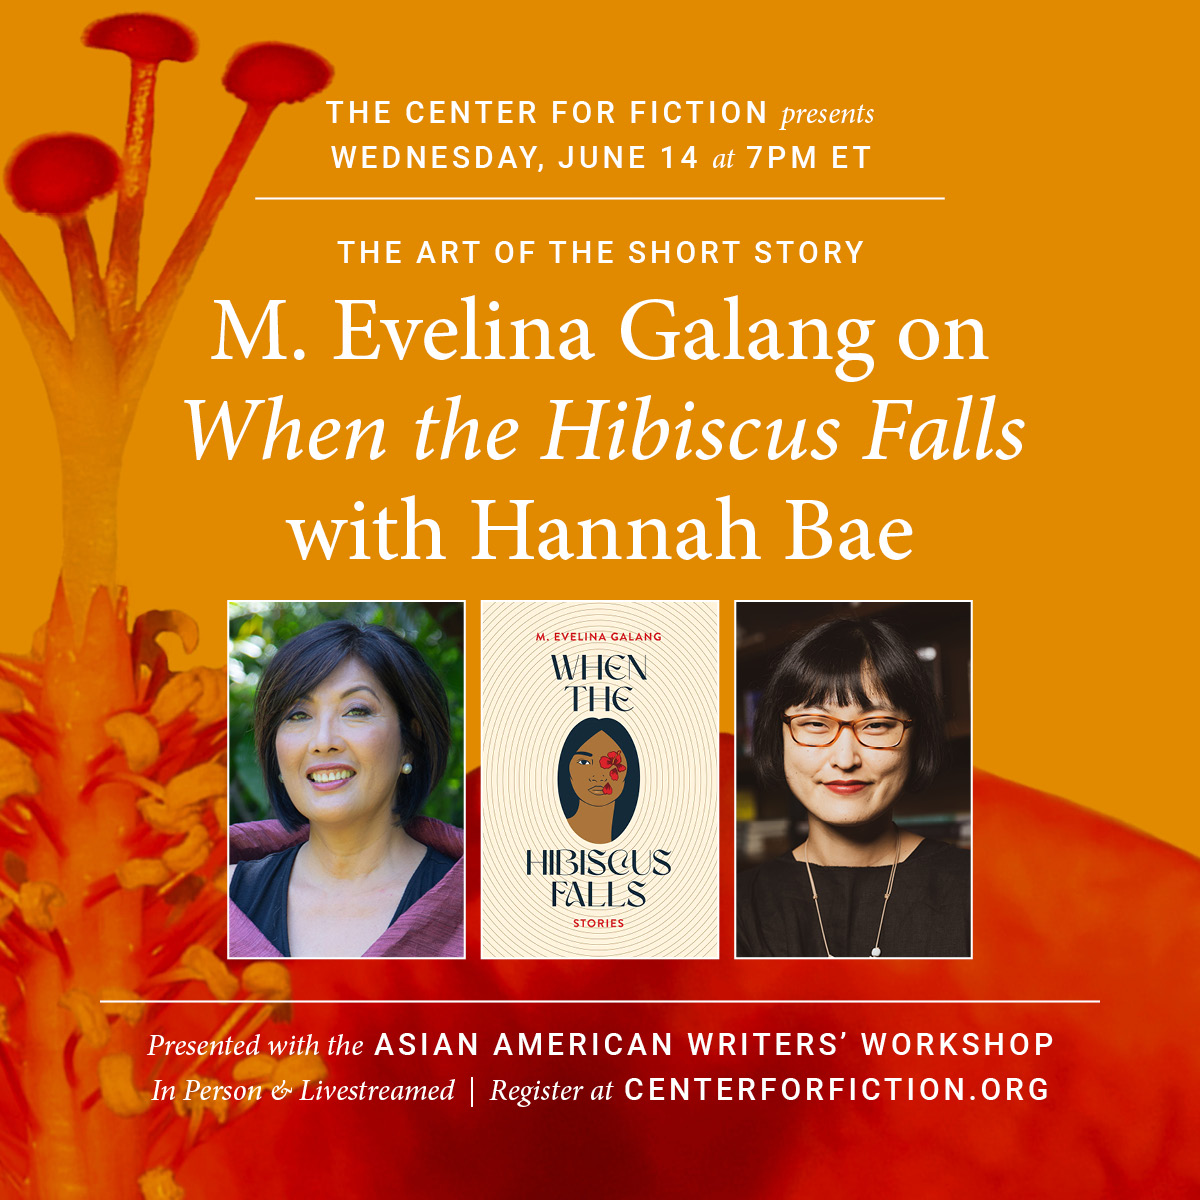 The Art of the Short Story: M. Evelina Galang on When the Hibiscus Falls with Hannah Bae